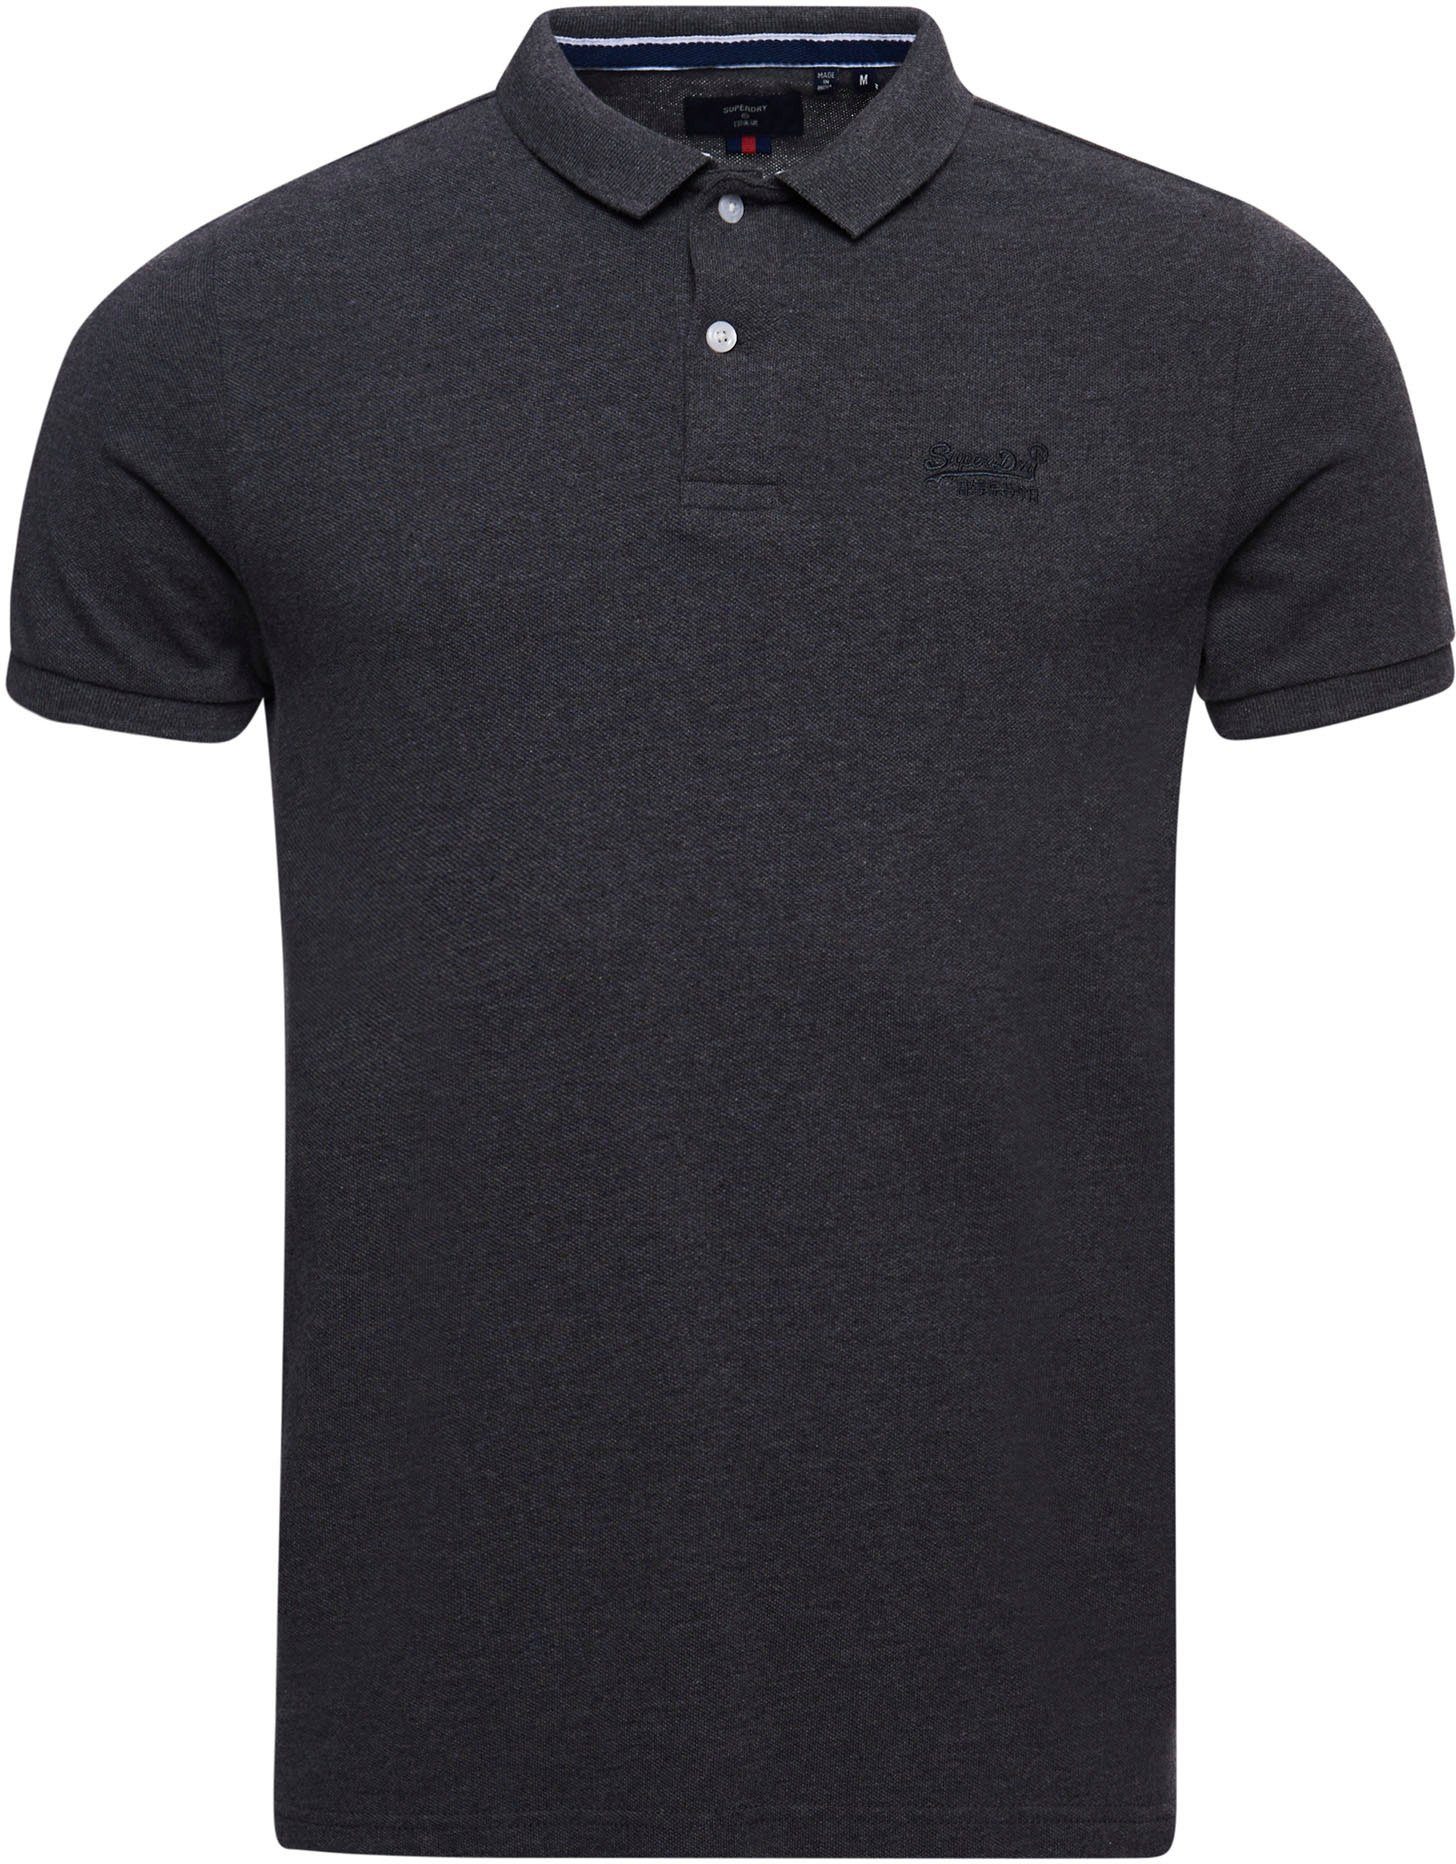 rich marl PIQUE Poloshirt charcoal POLO Superdry CLASSIC